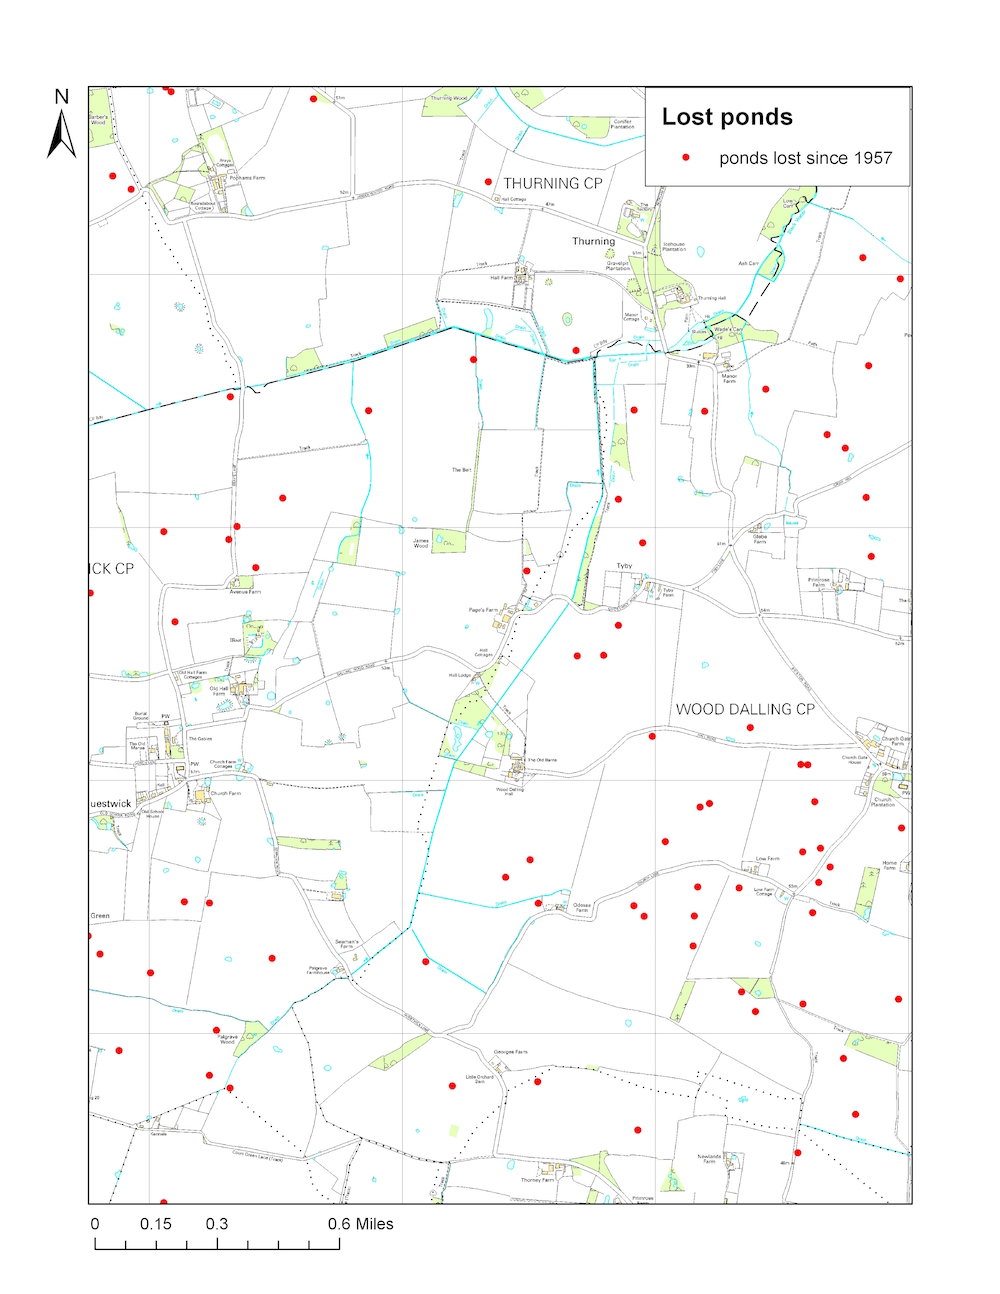 Each red dot denotes a pond lost since 1957. This example over a very small area of Norfolk is a trend seen across Britain 